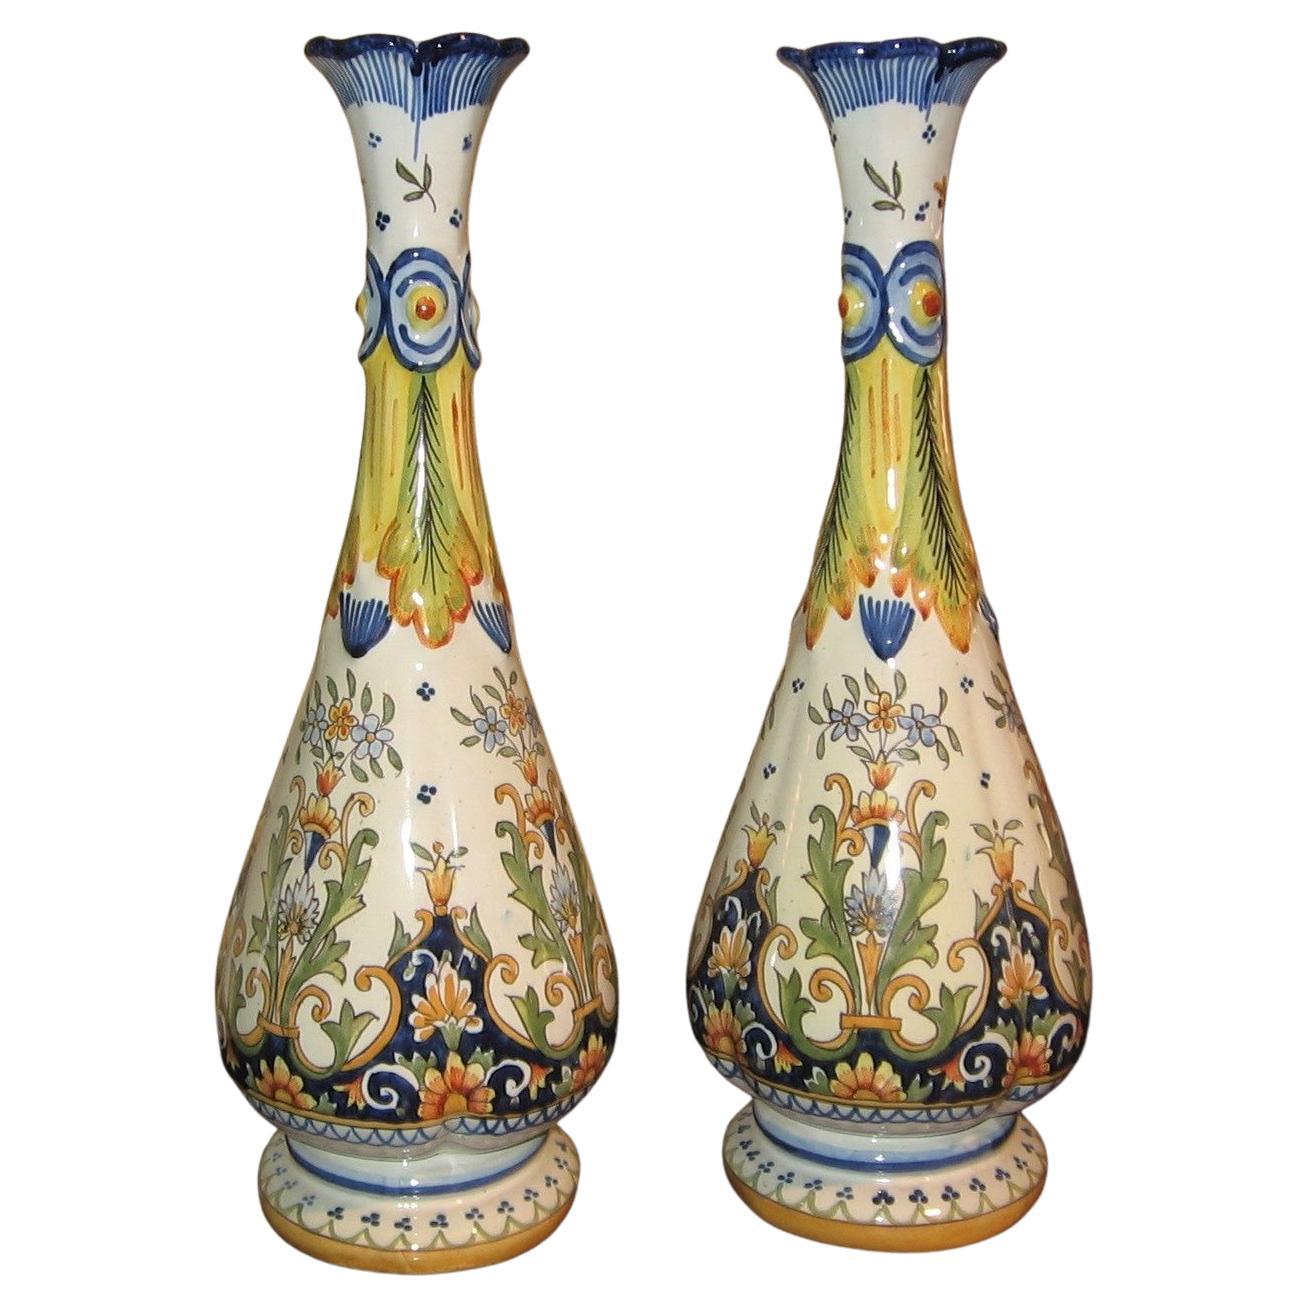 Attractive Pair of Old Faience Tall Vases from England, circa 1880 For Sale